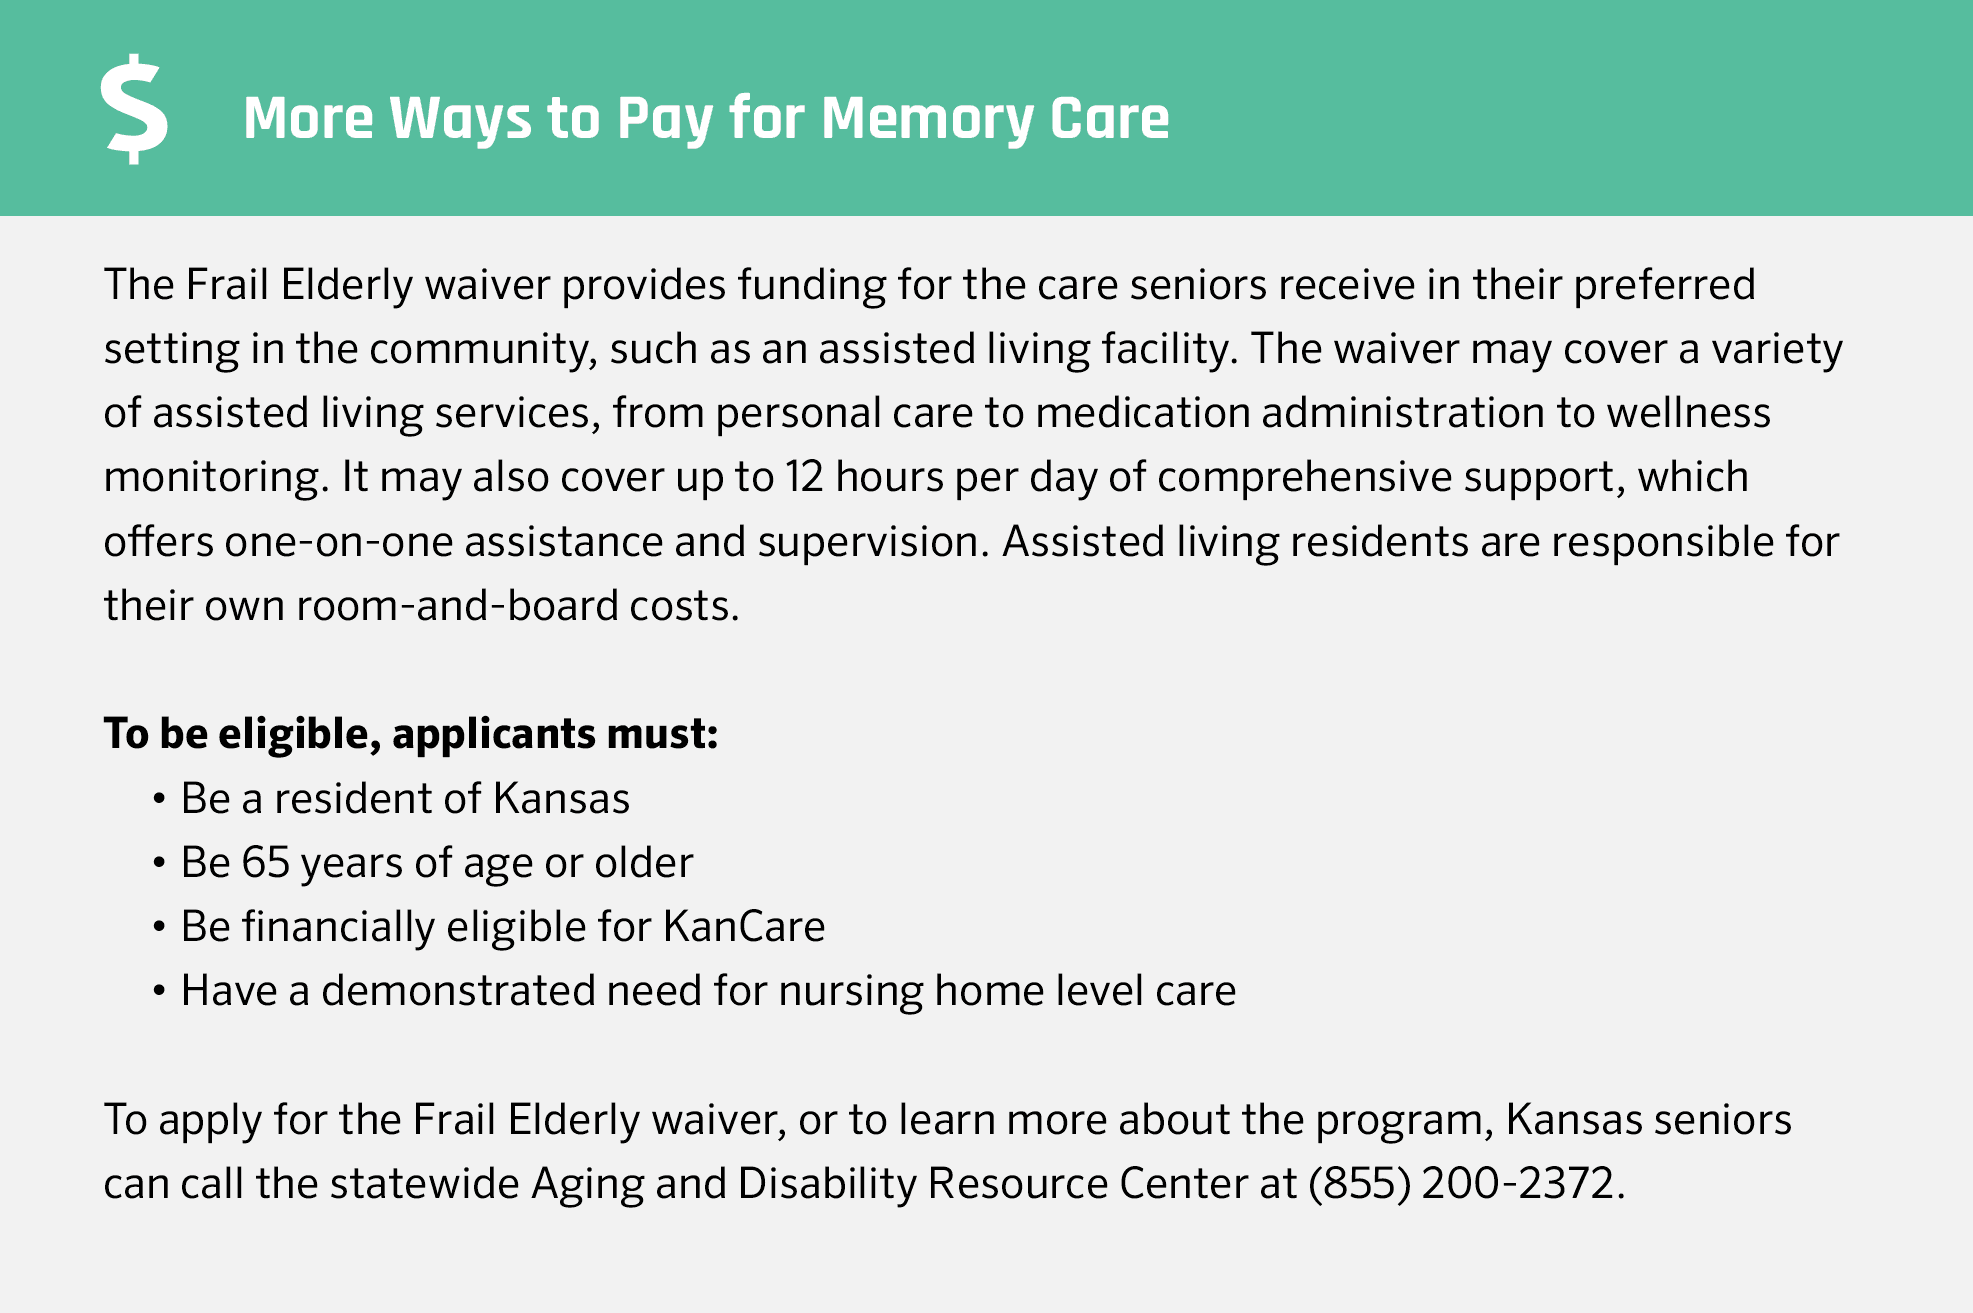 More ways to pay for memory care in Kansas